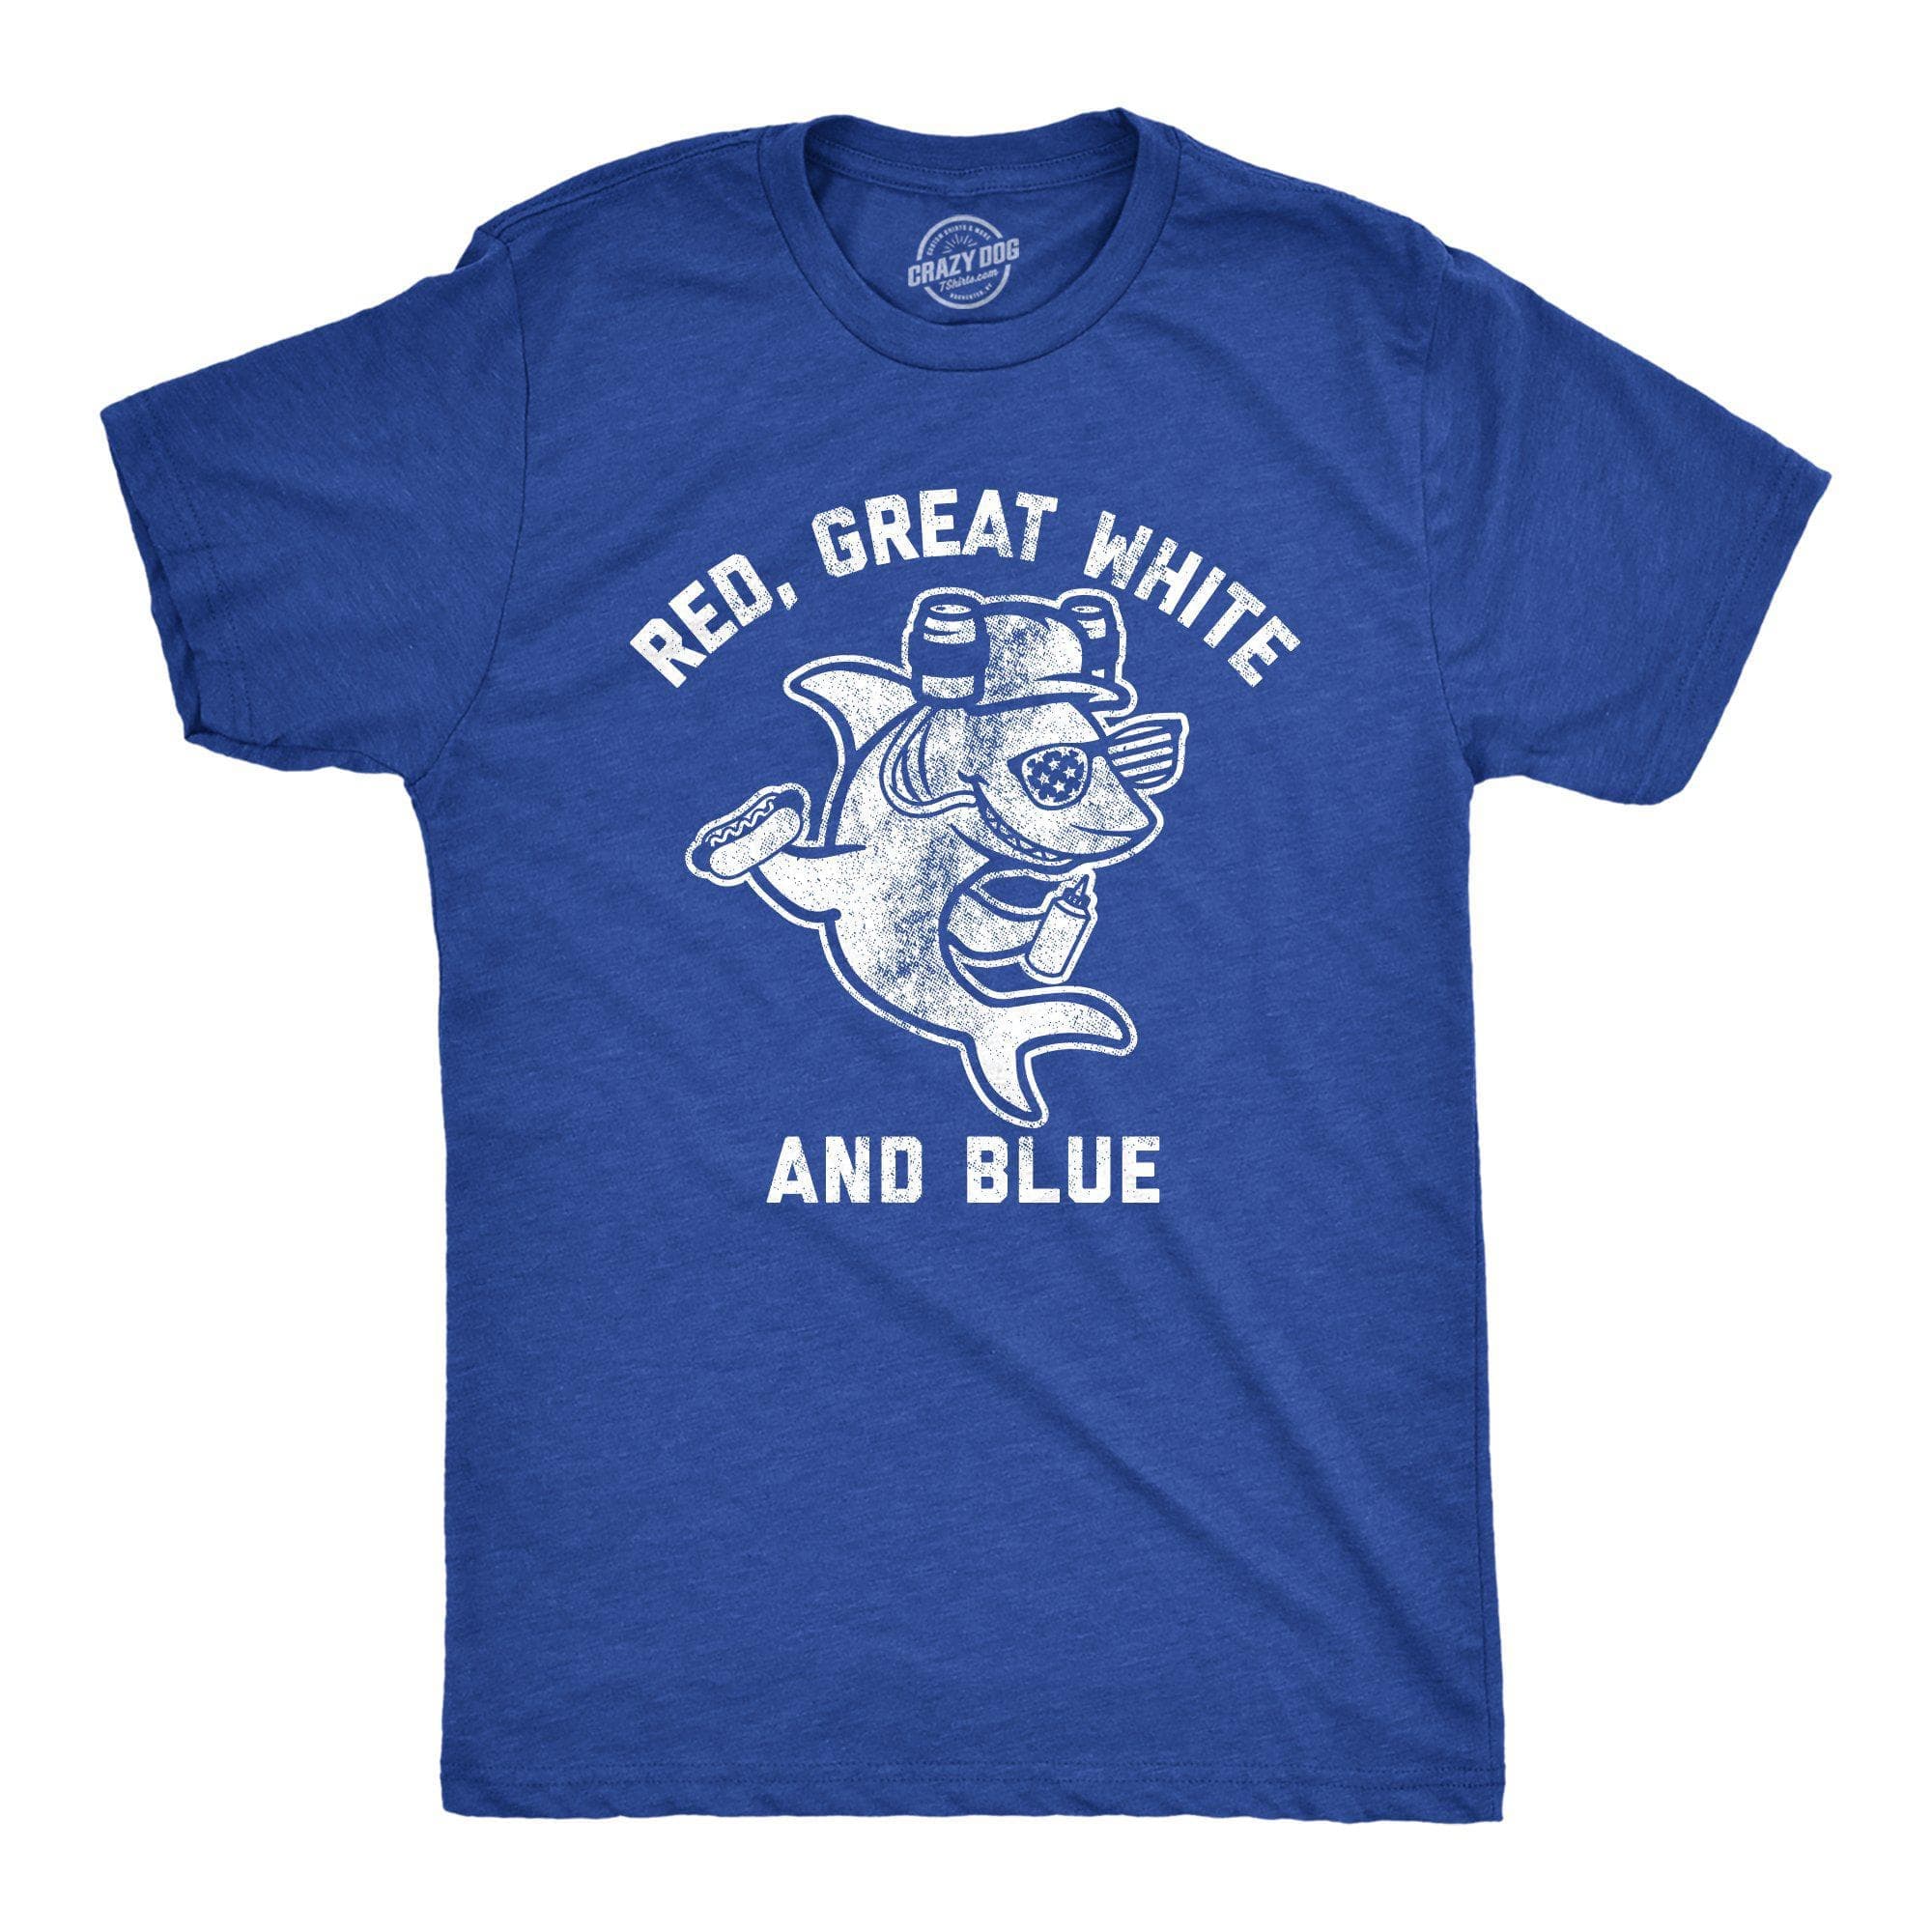 Red, Great White, And Blue Men's Tshirt - Crazy Dog T-Shirts